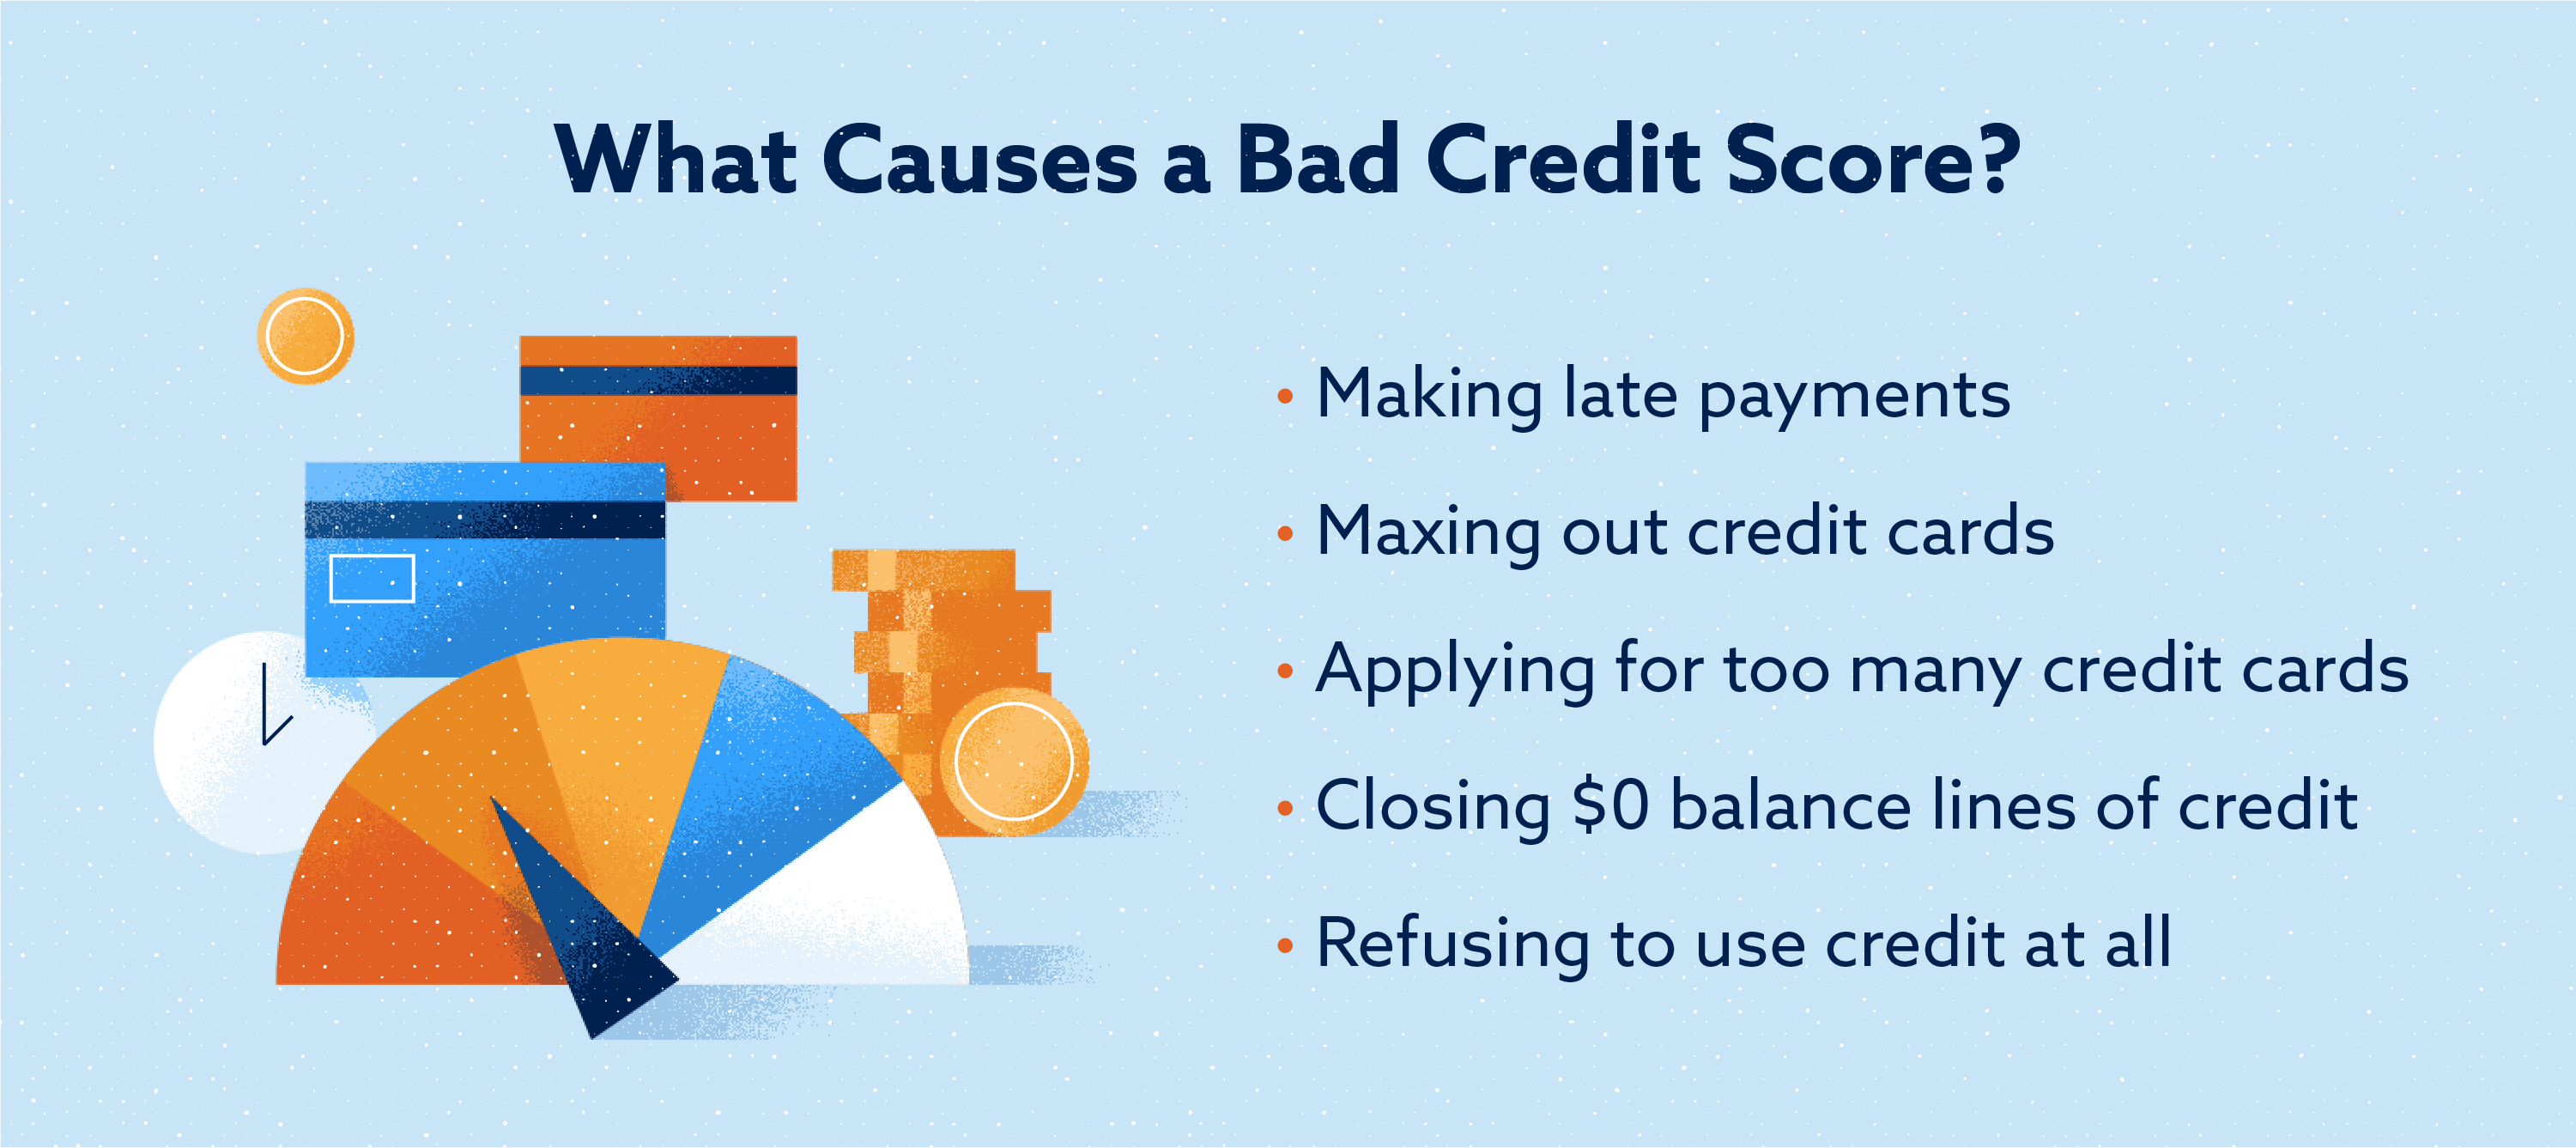 What Is a Credit Score and Why Is It Important?